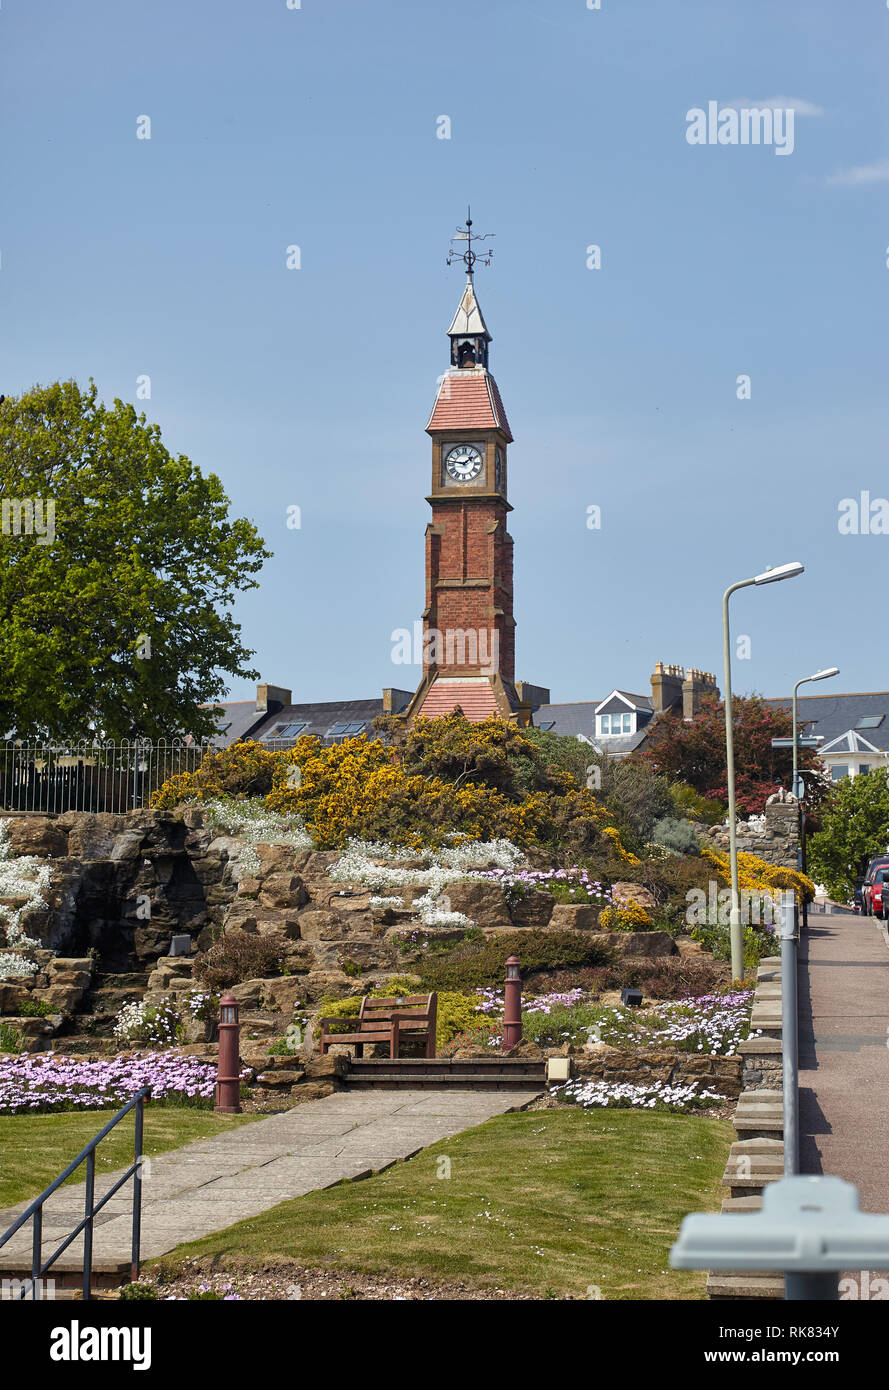 The Jubilee Clock Tower standing at the top of Sea Hill in the Seafield Gardens Seaton. It was built to commemorate Queen Victoria’s Golden Jubilee. D Stock Photo